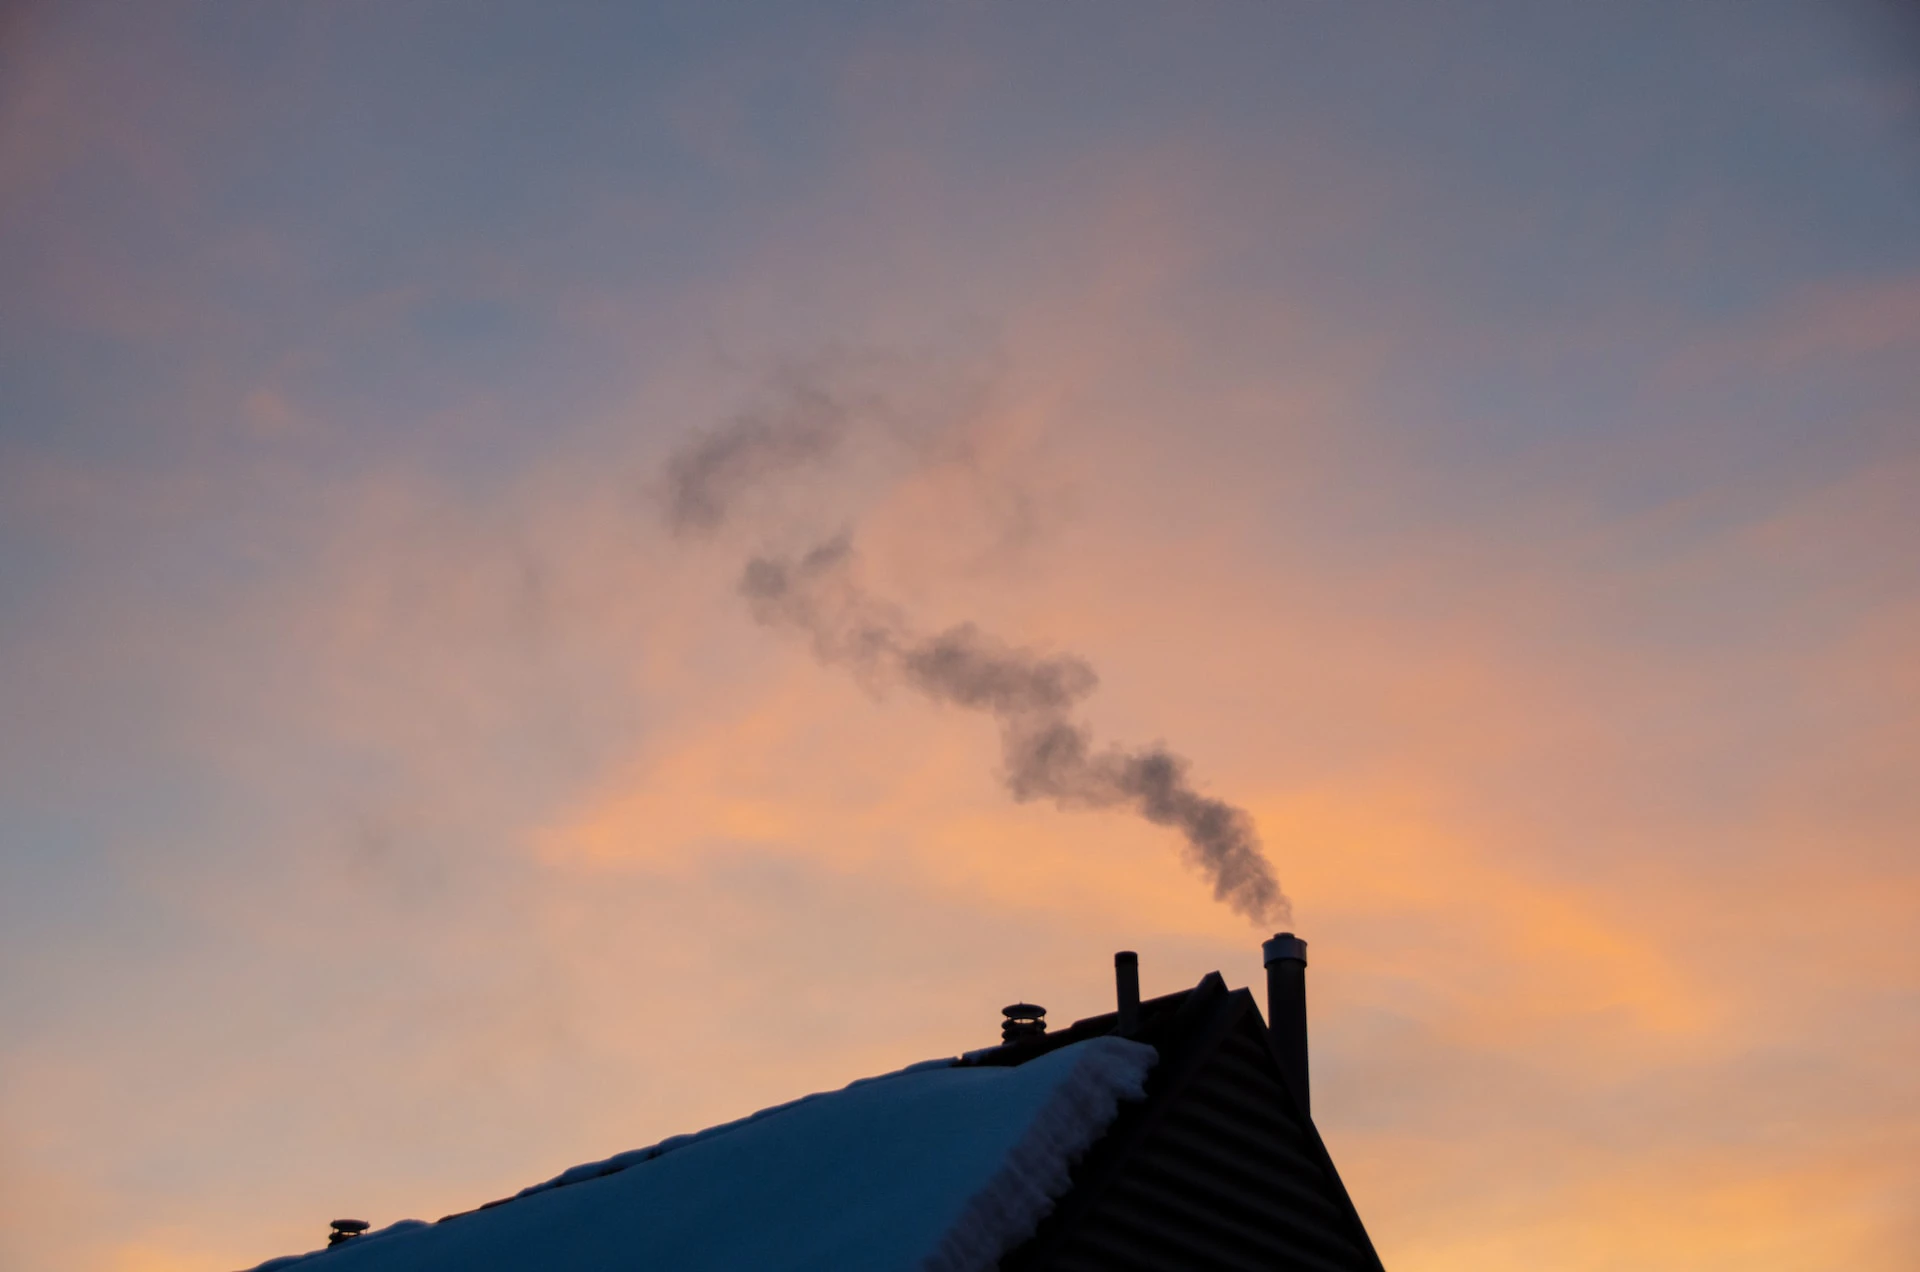 House with snow on the roof and a smoking chimney against  a sunrise